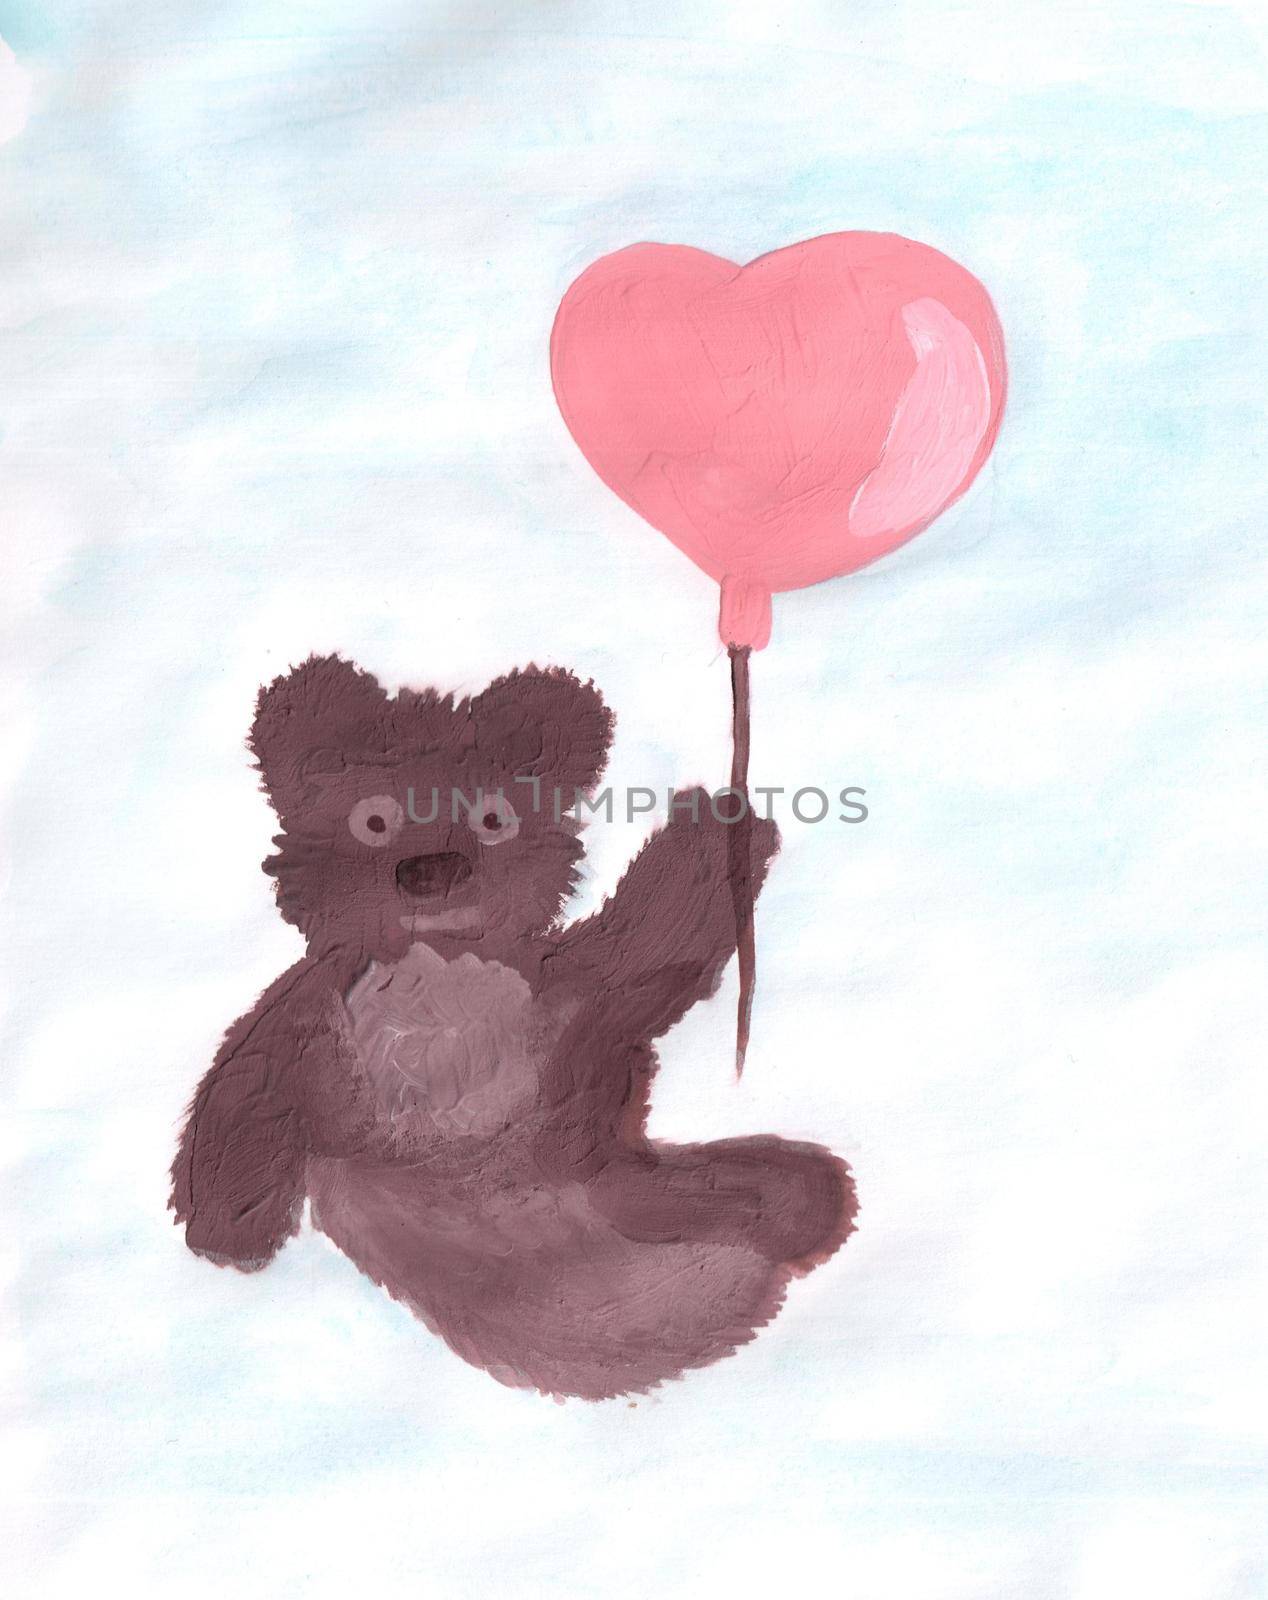 Colored Bear With Balloon Doodle Sketch. Hand-Drawn Illustration. Illustration For Design, T-Shirt, Print, Game And App. by Rina_Dozornaya